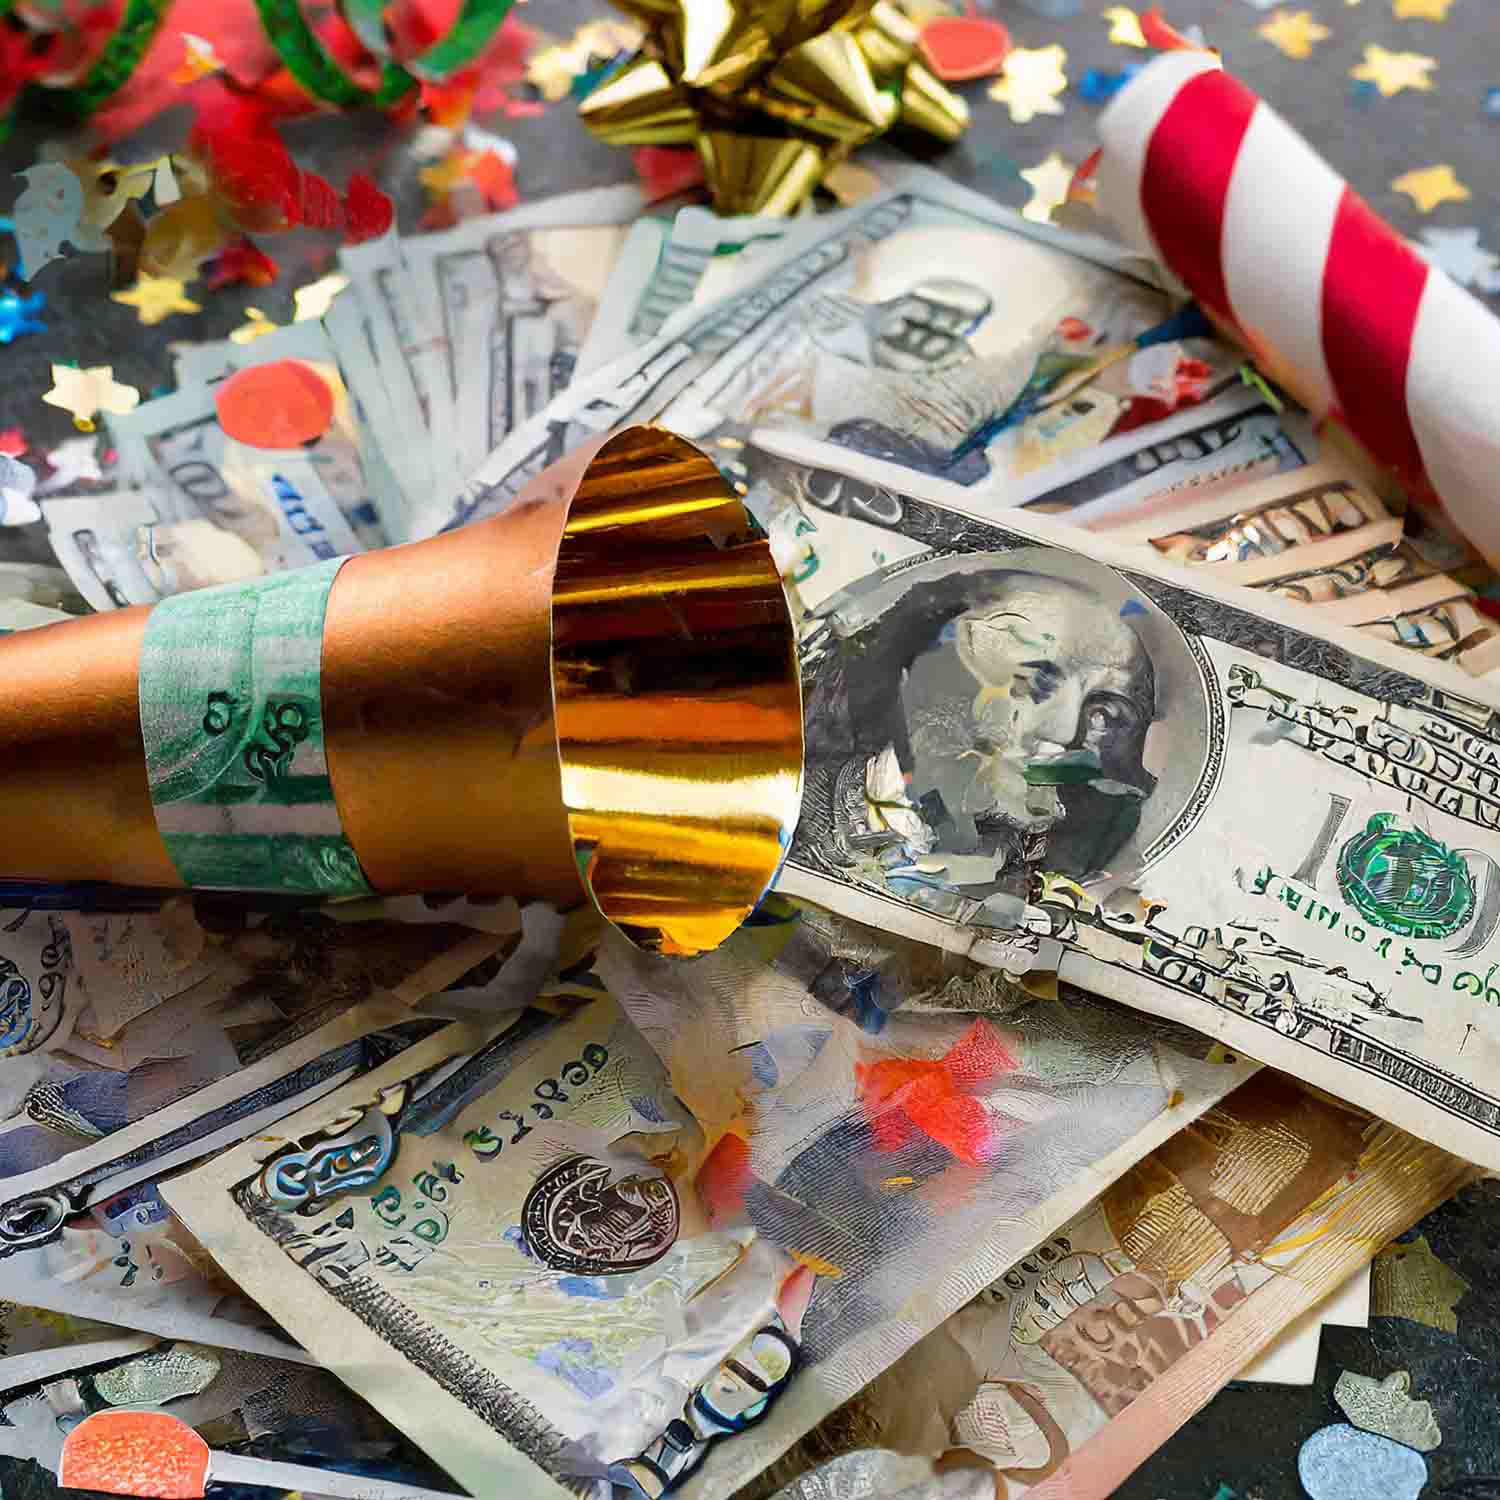 Photo of a party horn and confetti lying on top of a pile of one-hundred dollar bills.